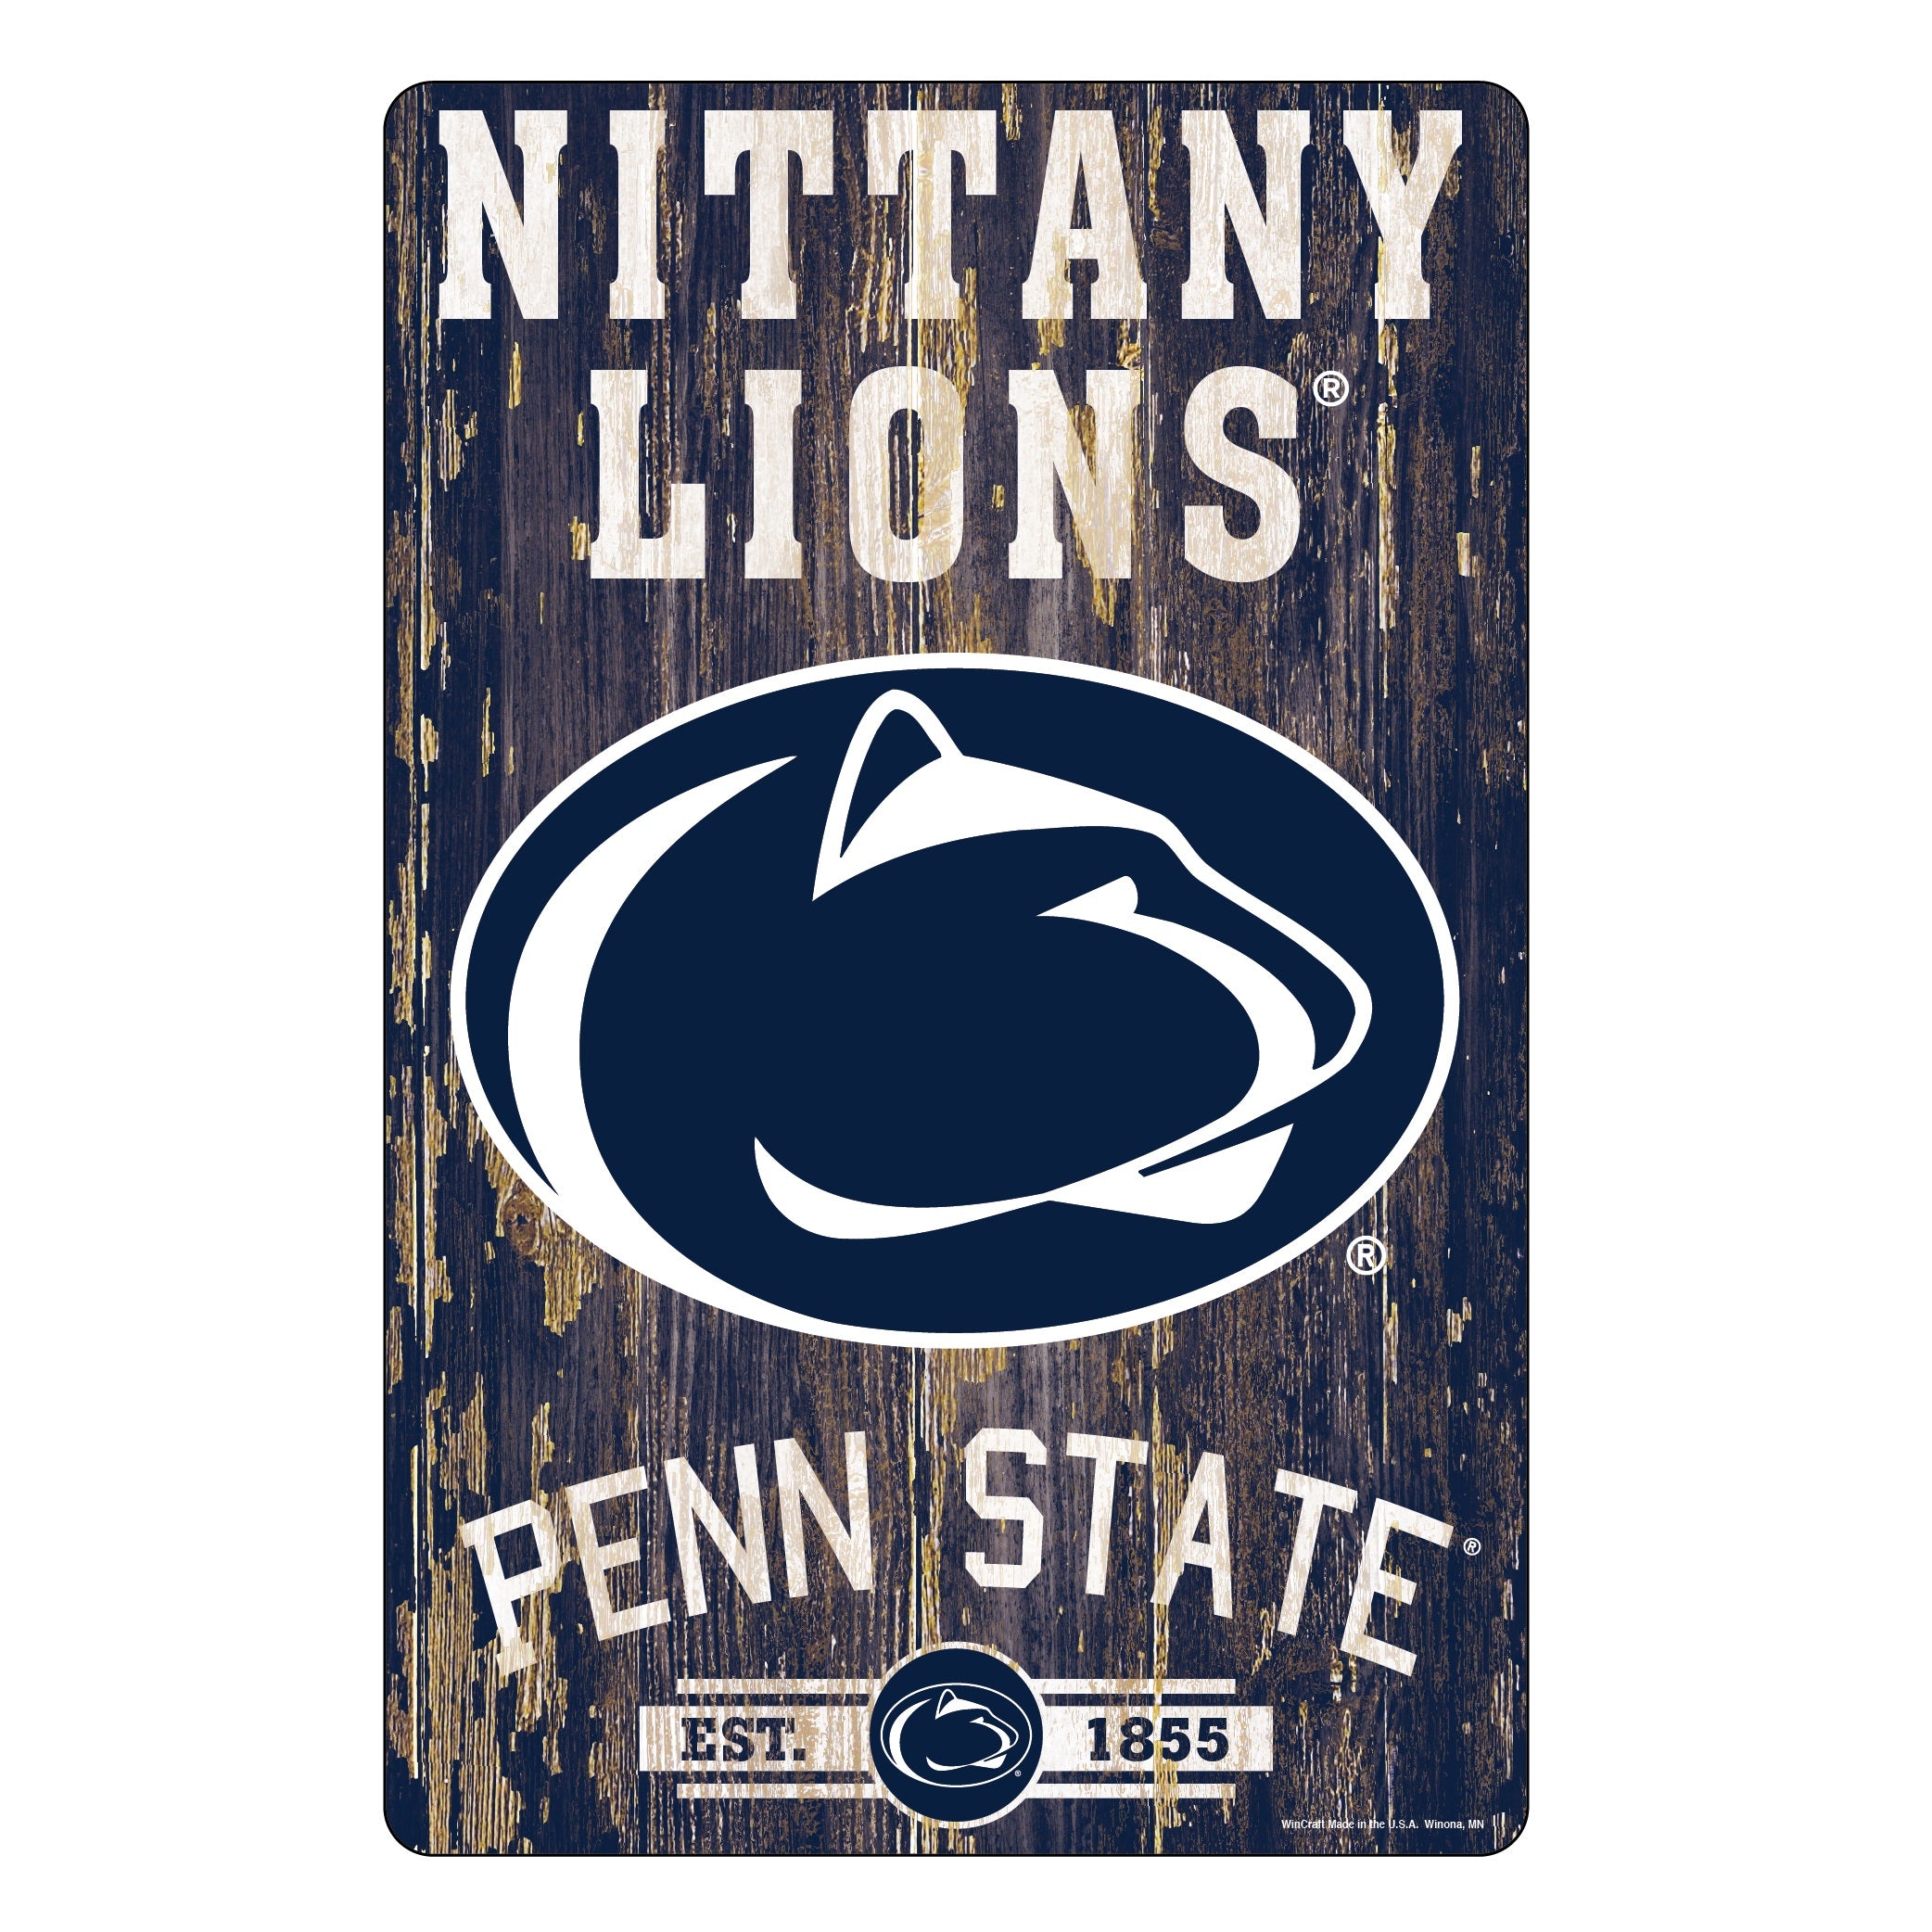 Penn State Nittany Lions Sign 11x17 Wood Slogan Design